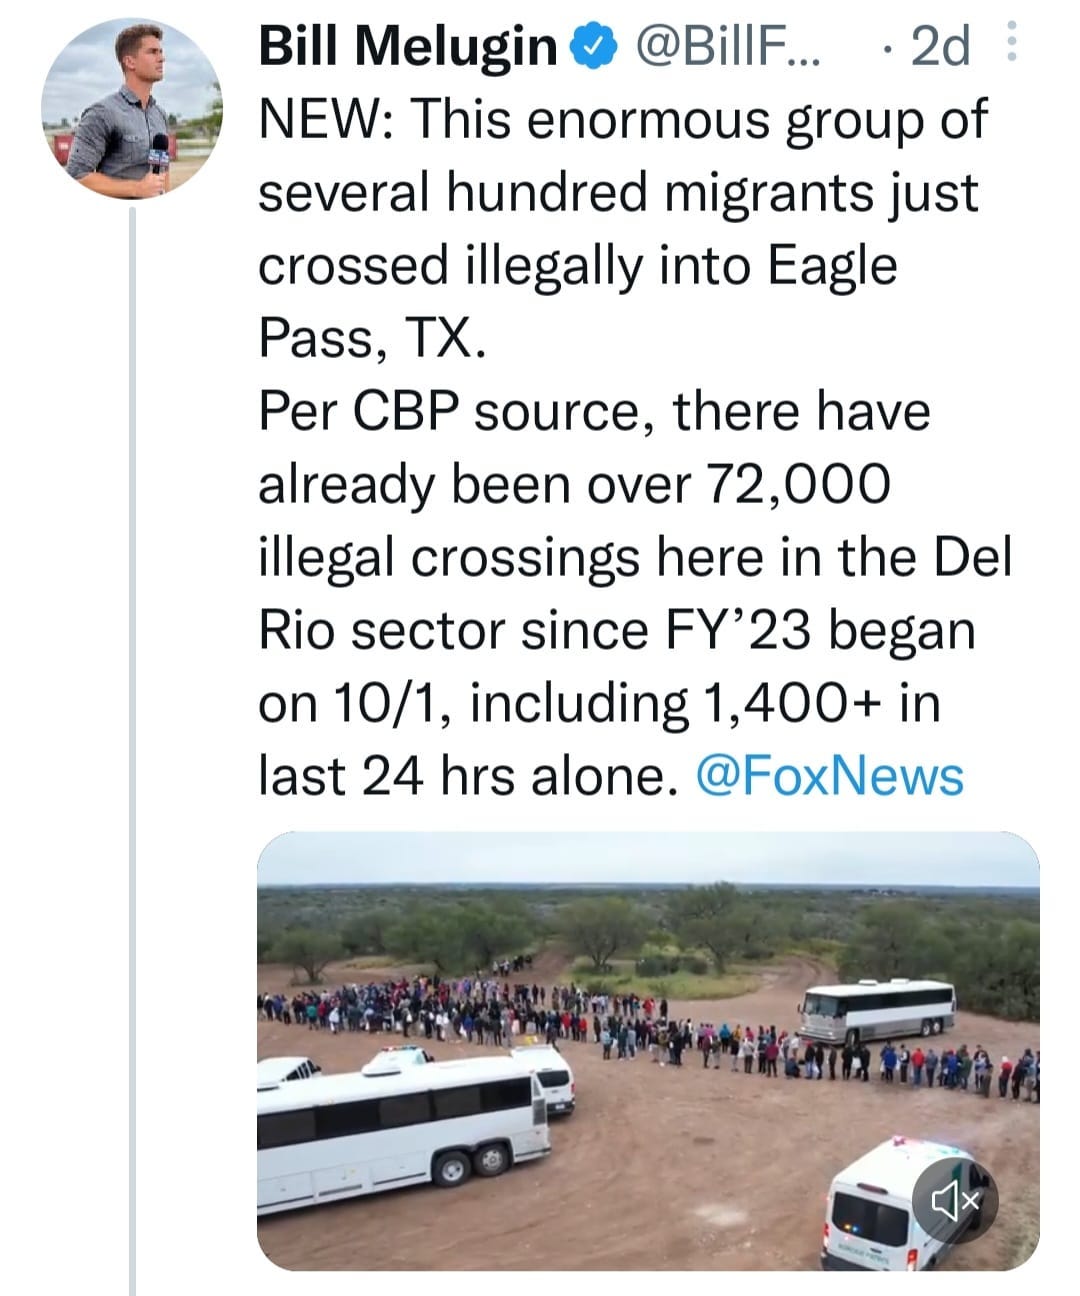 May be an image of 1 person, standing, outdoors and text that says 'Bill Melugin @BillF... 2d NEW: This enormous group of several hundred migrants just crossed illegally into Eagle Pass, TX. Per CBP source, there have already been over 72,000 illegal crossings here in the Del Rio sector since FY'23 began on 10/1, including 1,400+ in last 24 hrs alone. @FoxNews'